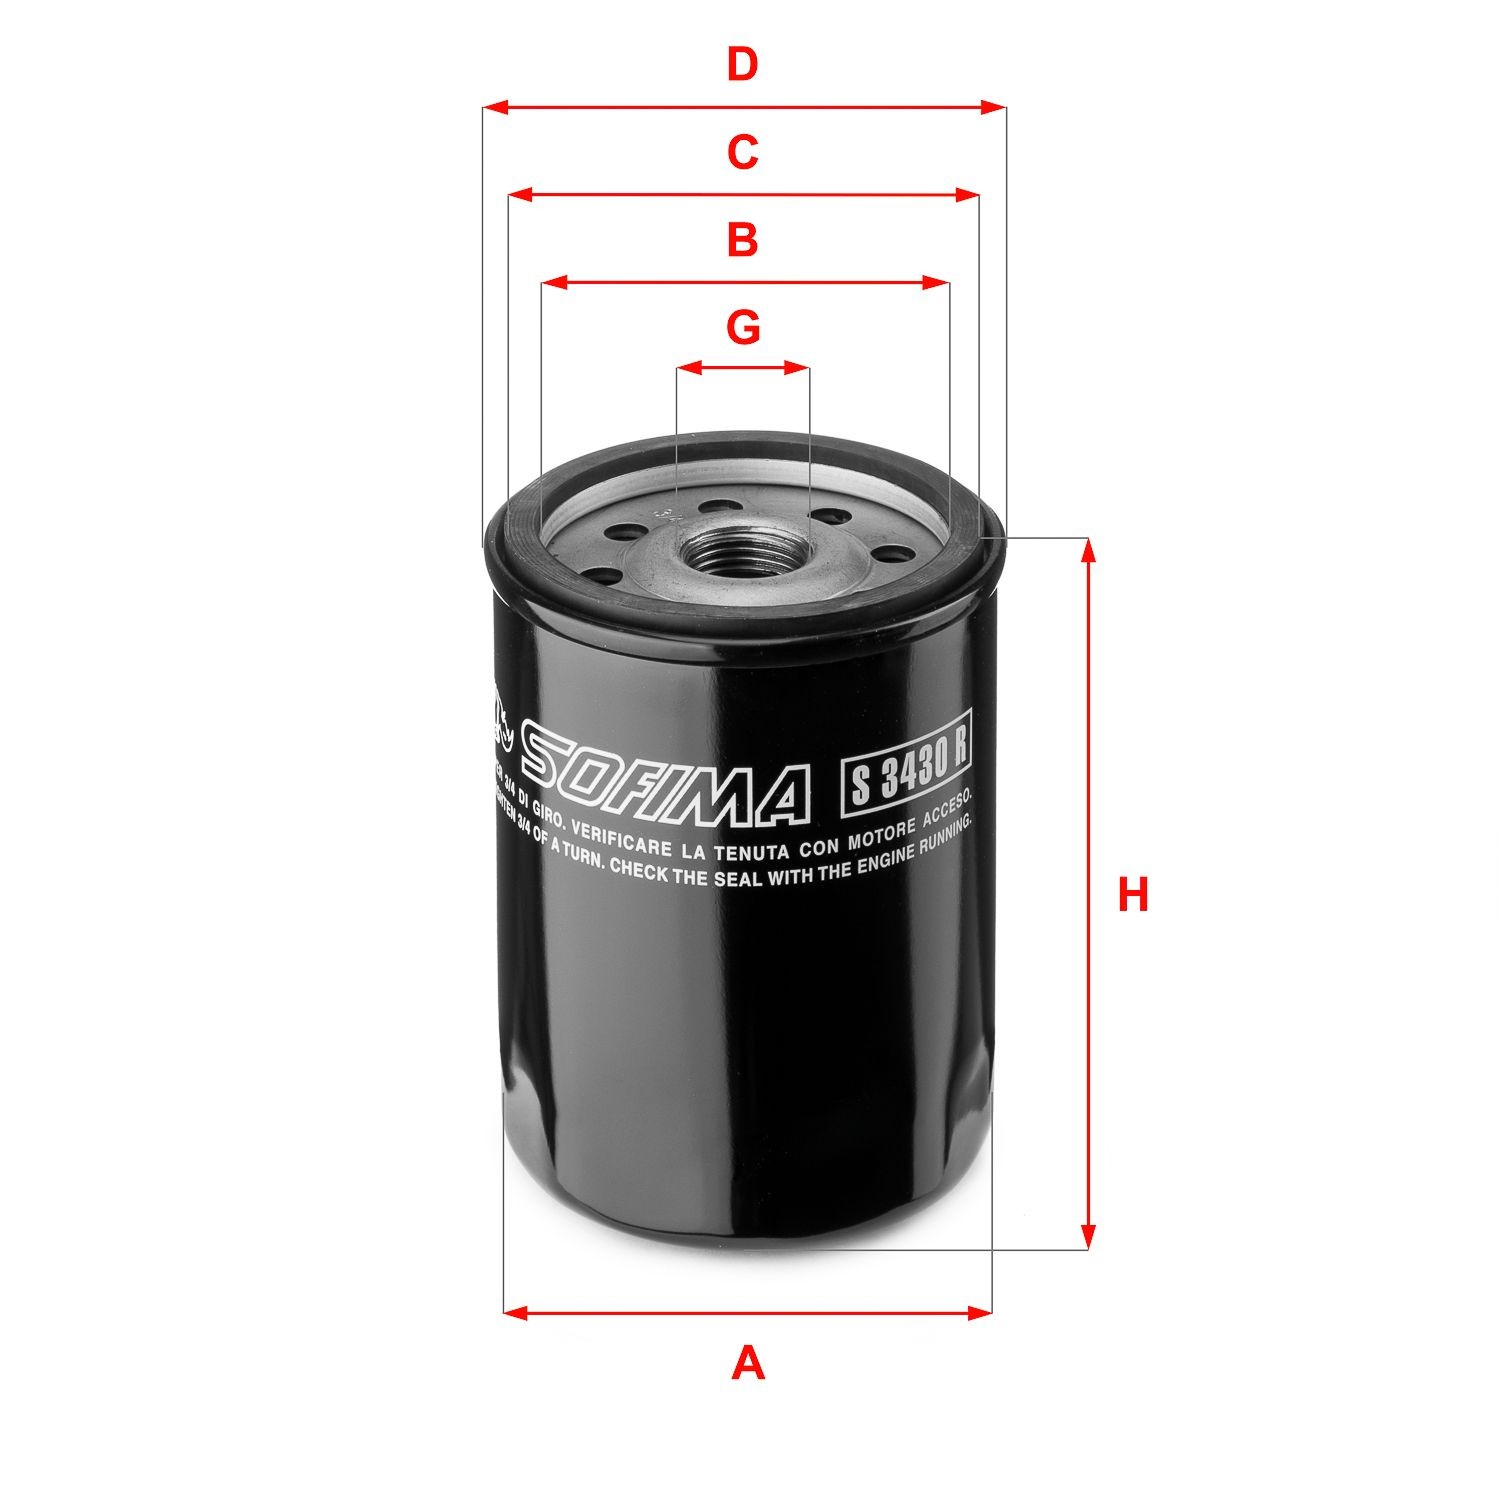 SOFIMA S 3430 R Oil filter 3/4-16 UNF, with two anti-return valves, Spin-on Filter